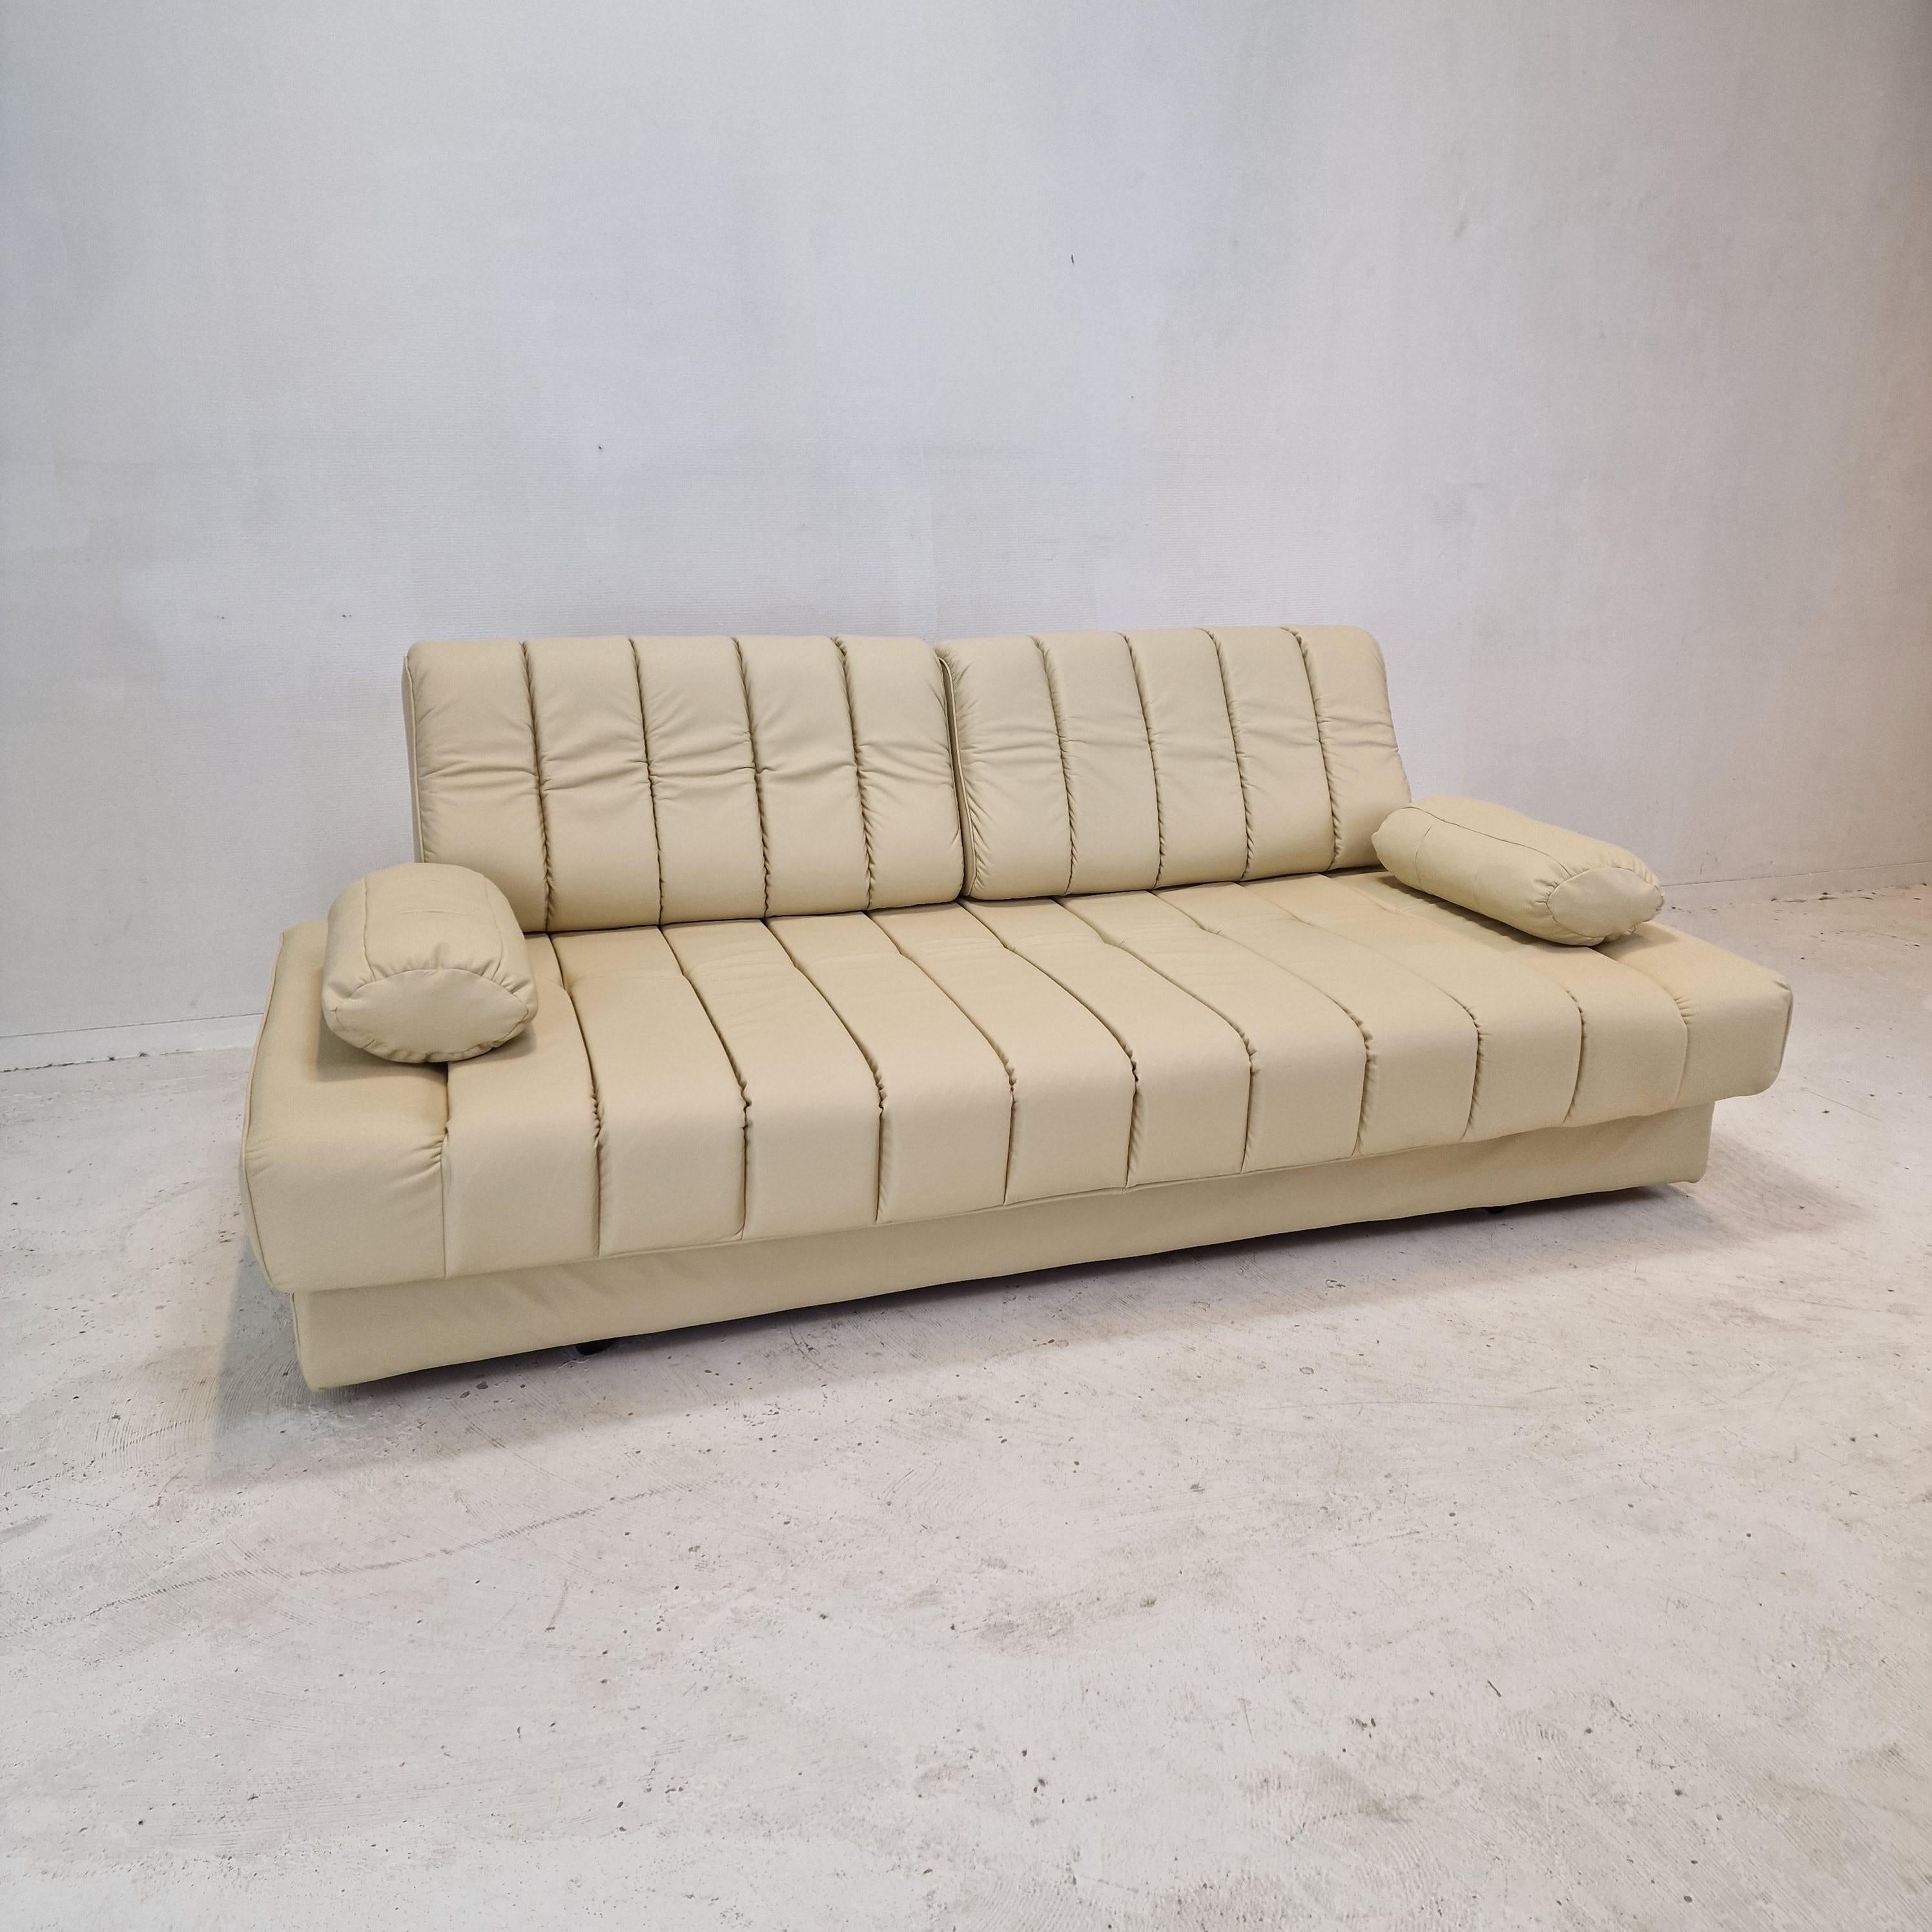 Modern DS-85 Sofa or Daybed by De Sede, Switzerland 1970s For Sale